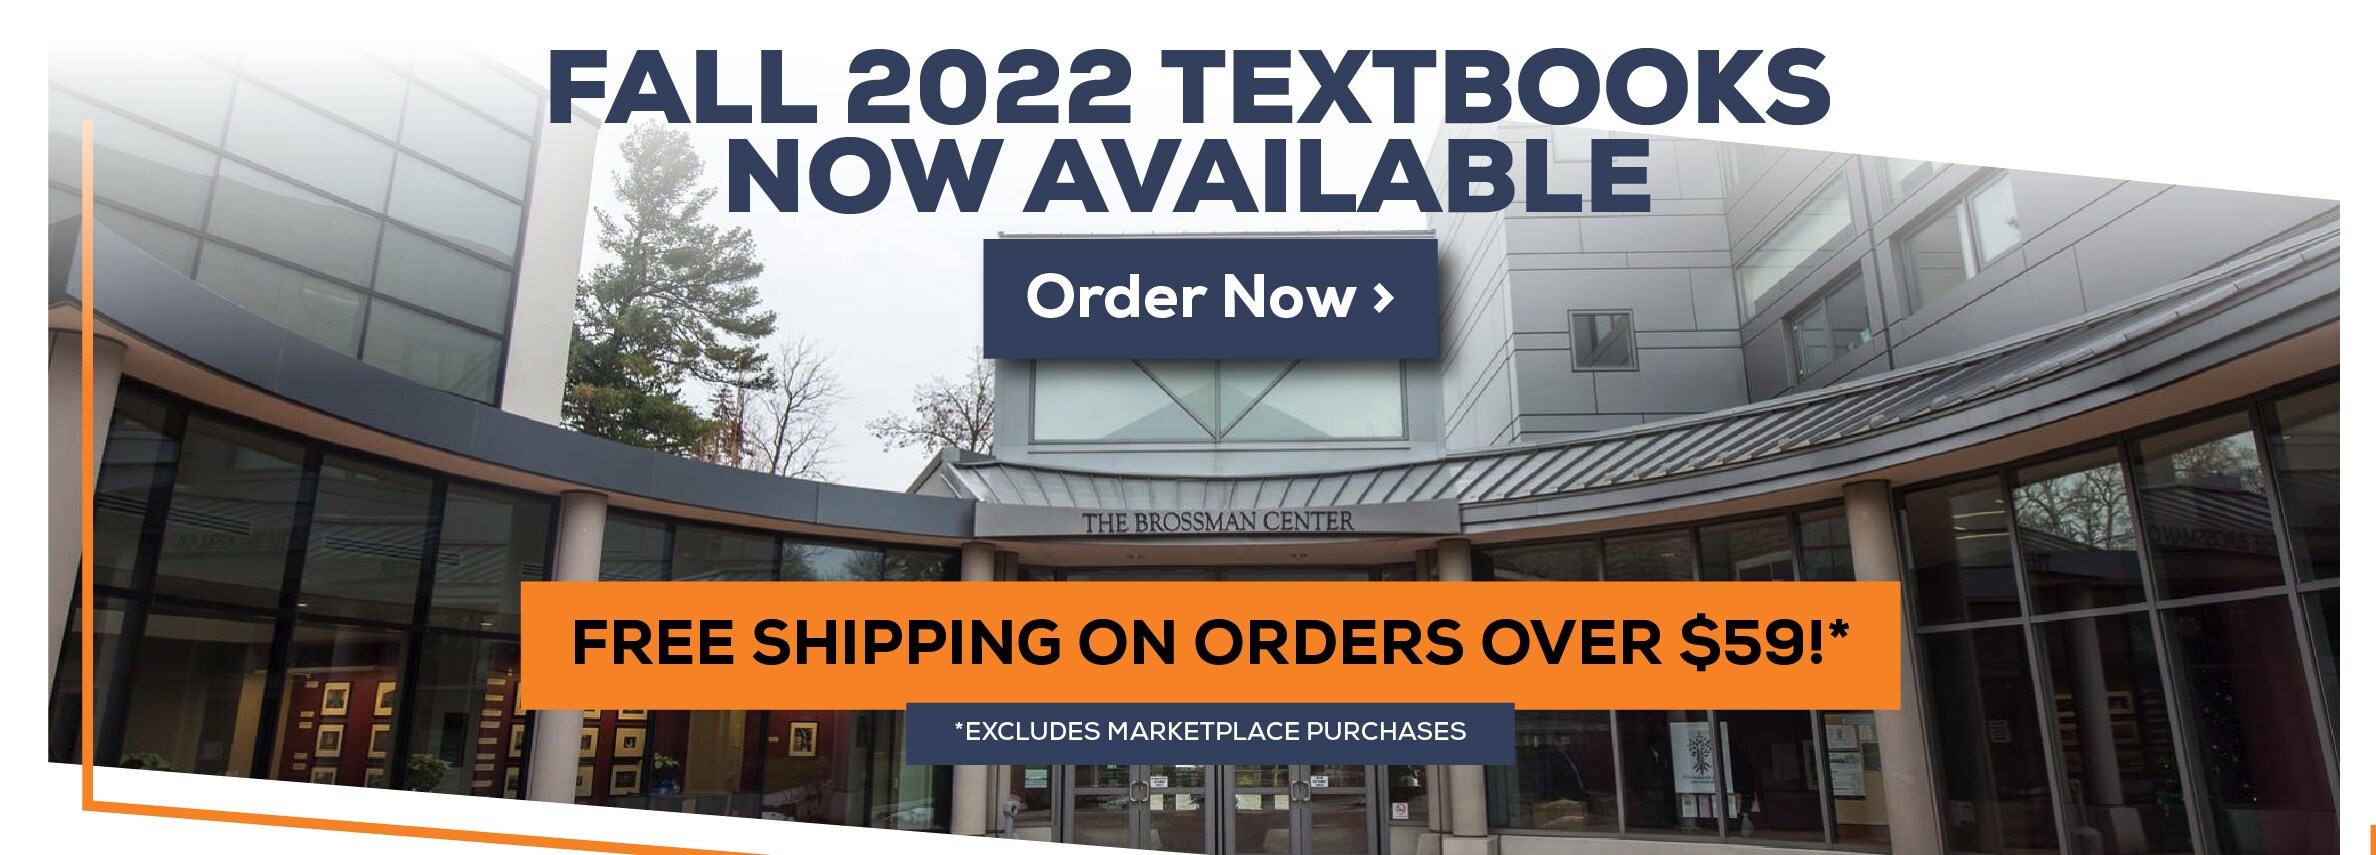 Fall 2022 Textbooks Now Available. FREE USPS SHIPPING ON ALL ORDERS OVER $59